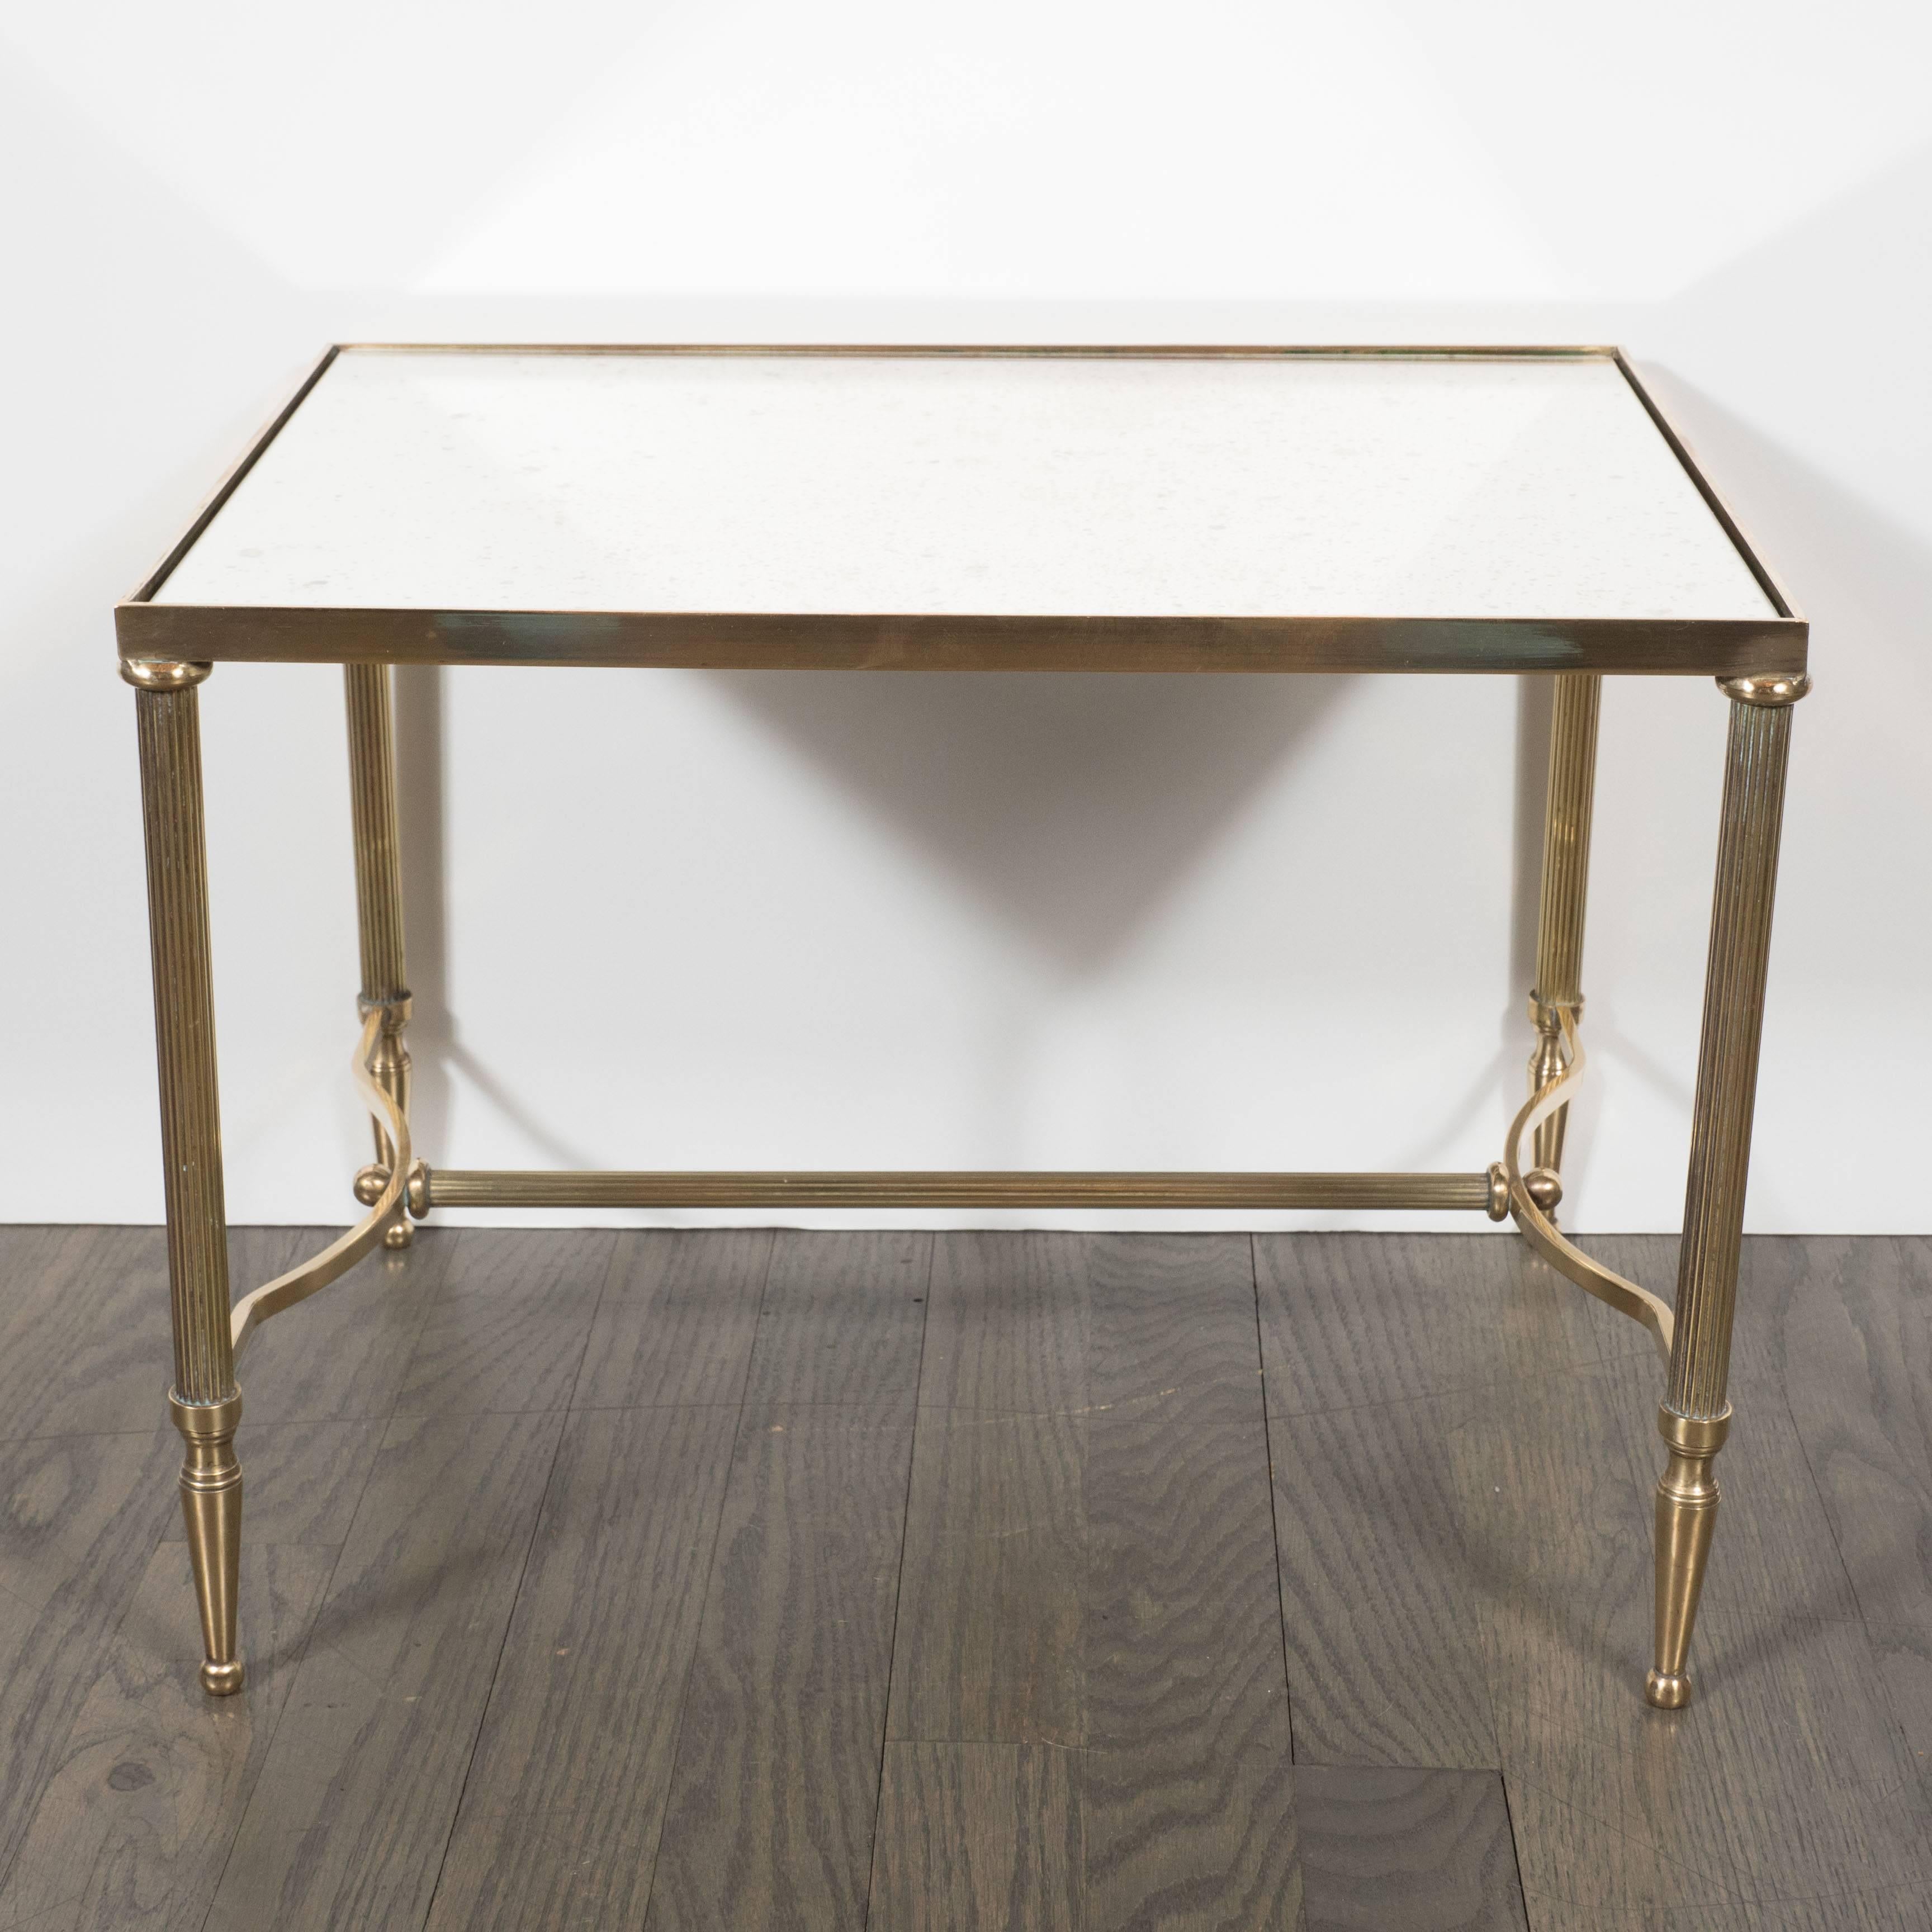 An occasional table in brass and antique mirror in the manner of Jansen. Spiraling ribbed legs are detailed with tapered feet with ball points. Cross-supports attached by a connecting rod connect opposing sides. An inset, antique mirrored top is